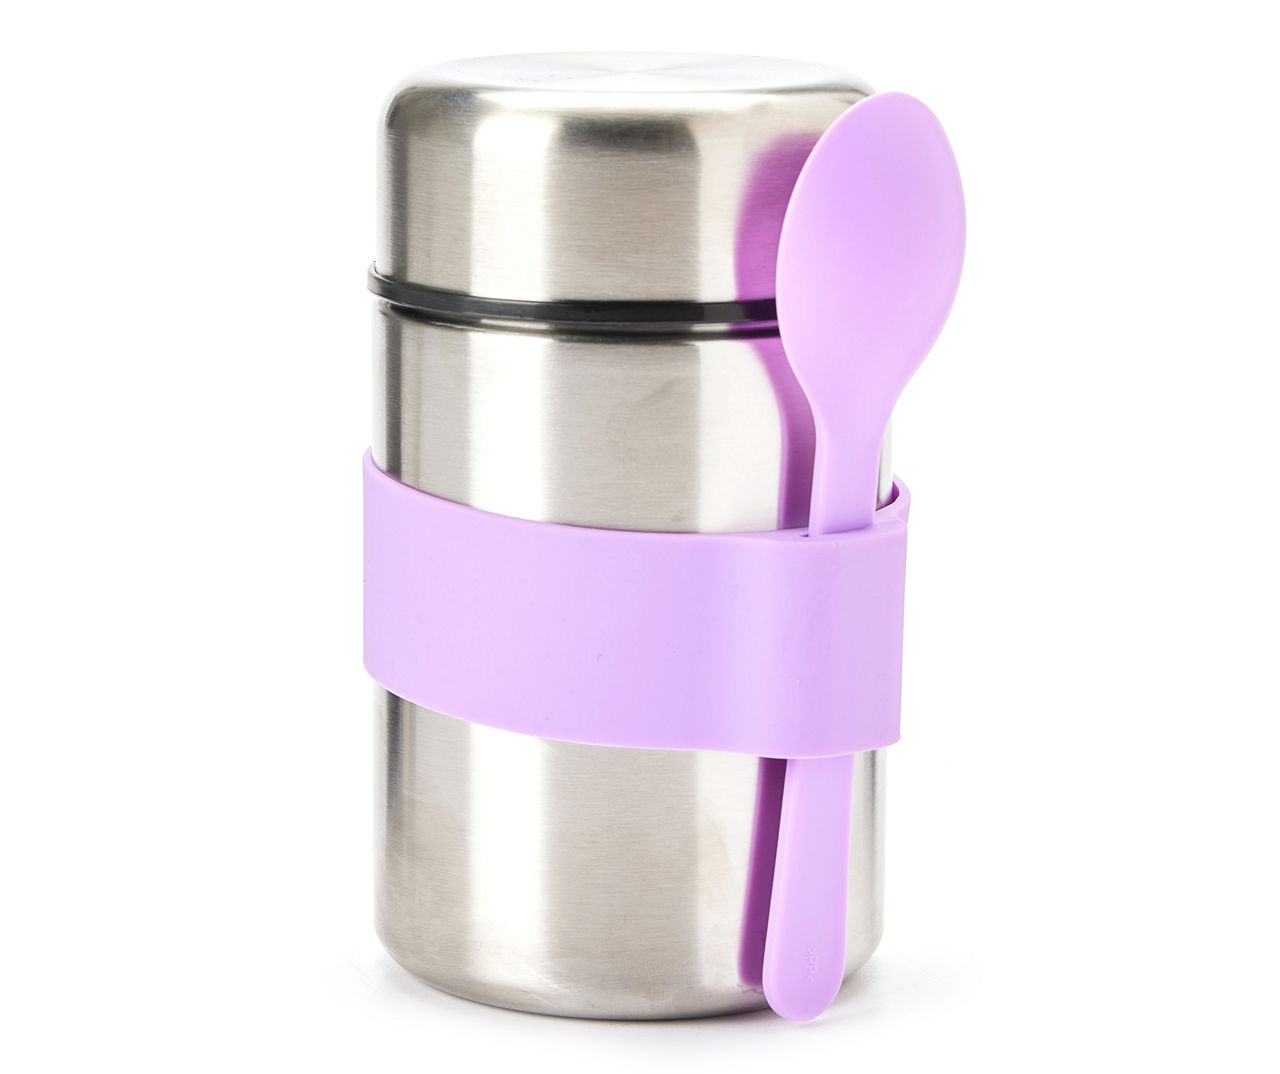 Stainless Steel Soup Thermos, 13 Oz.